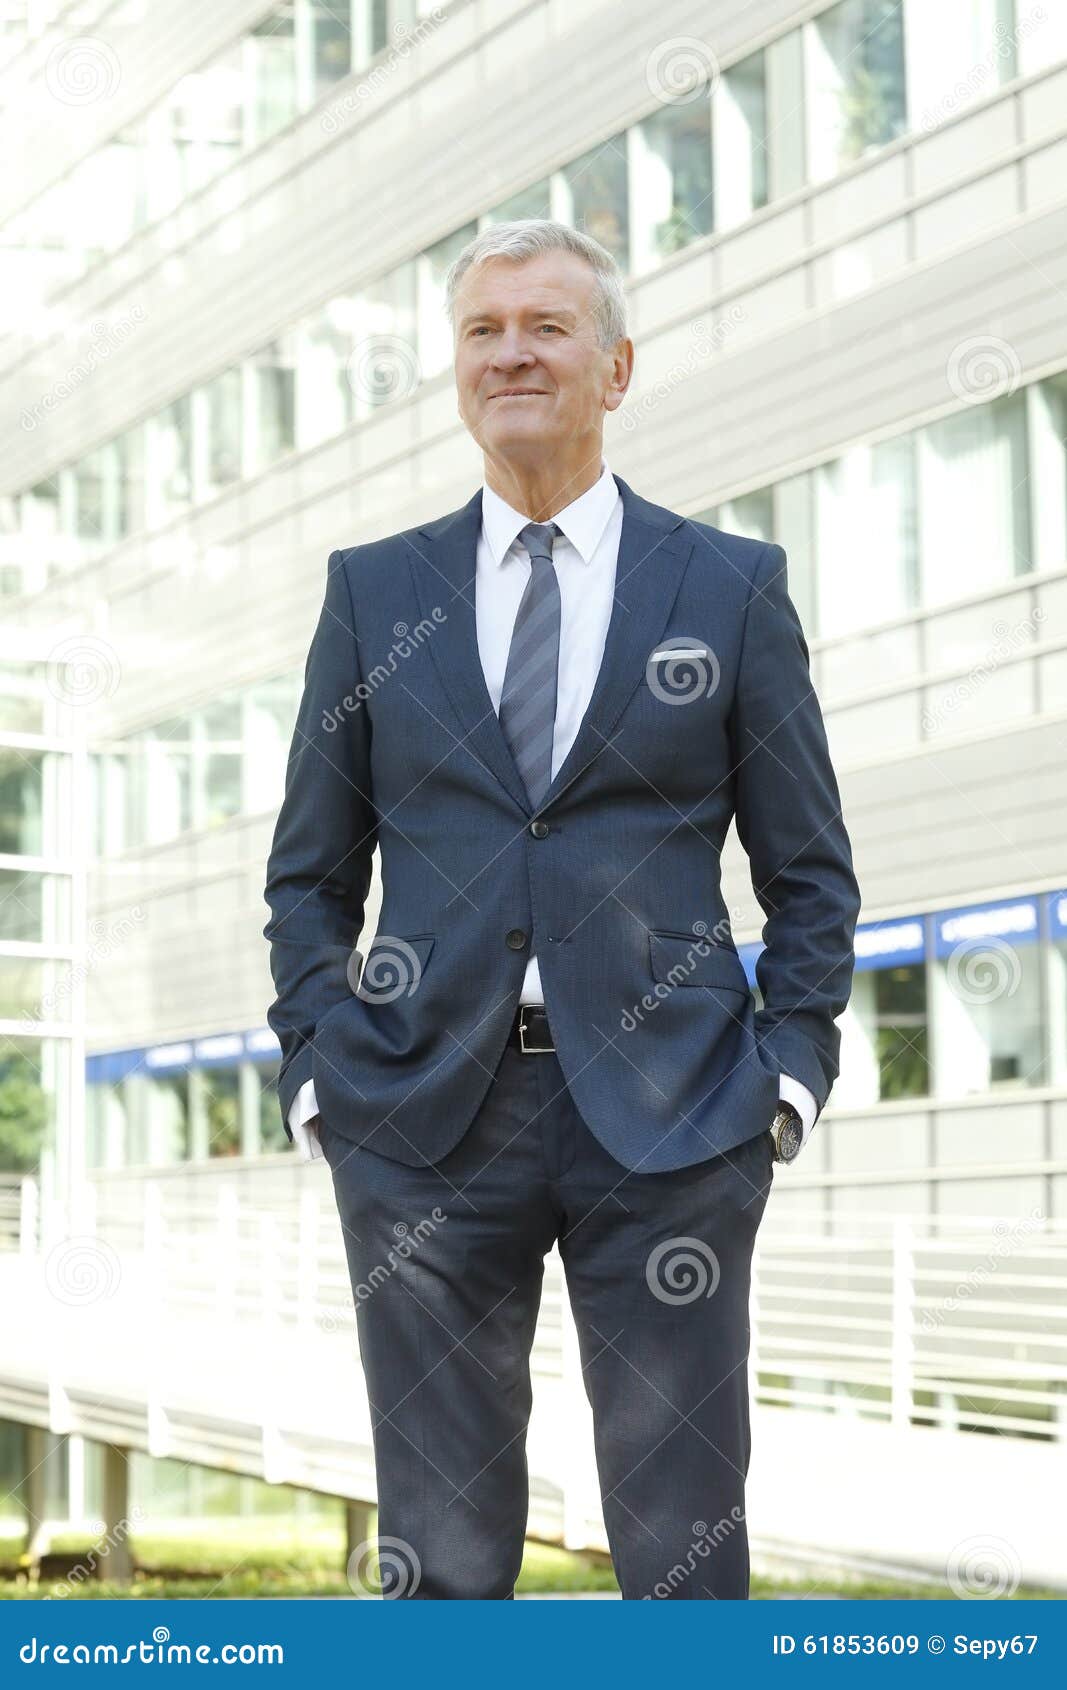 Senior manager portrait stock image. Image of standing - 61853609